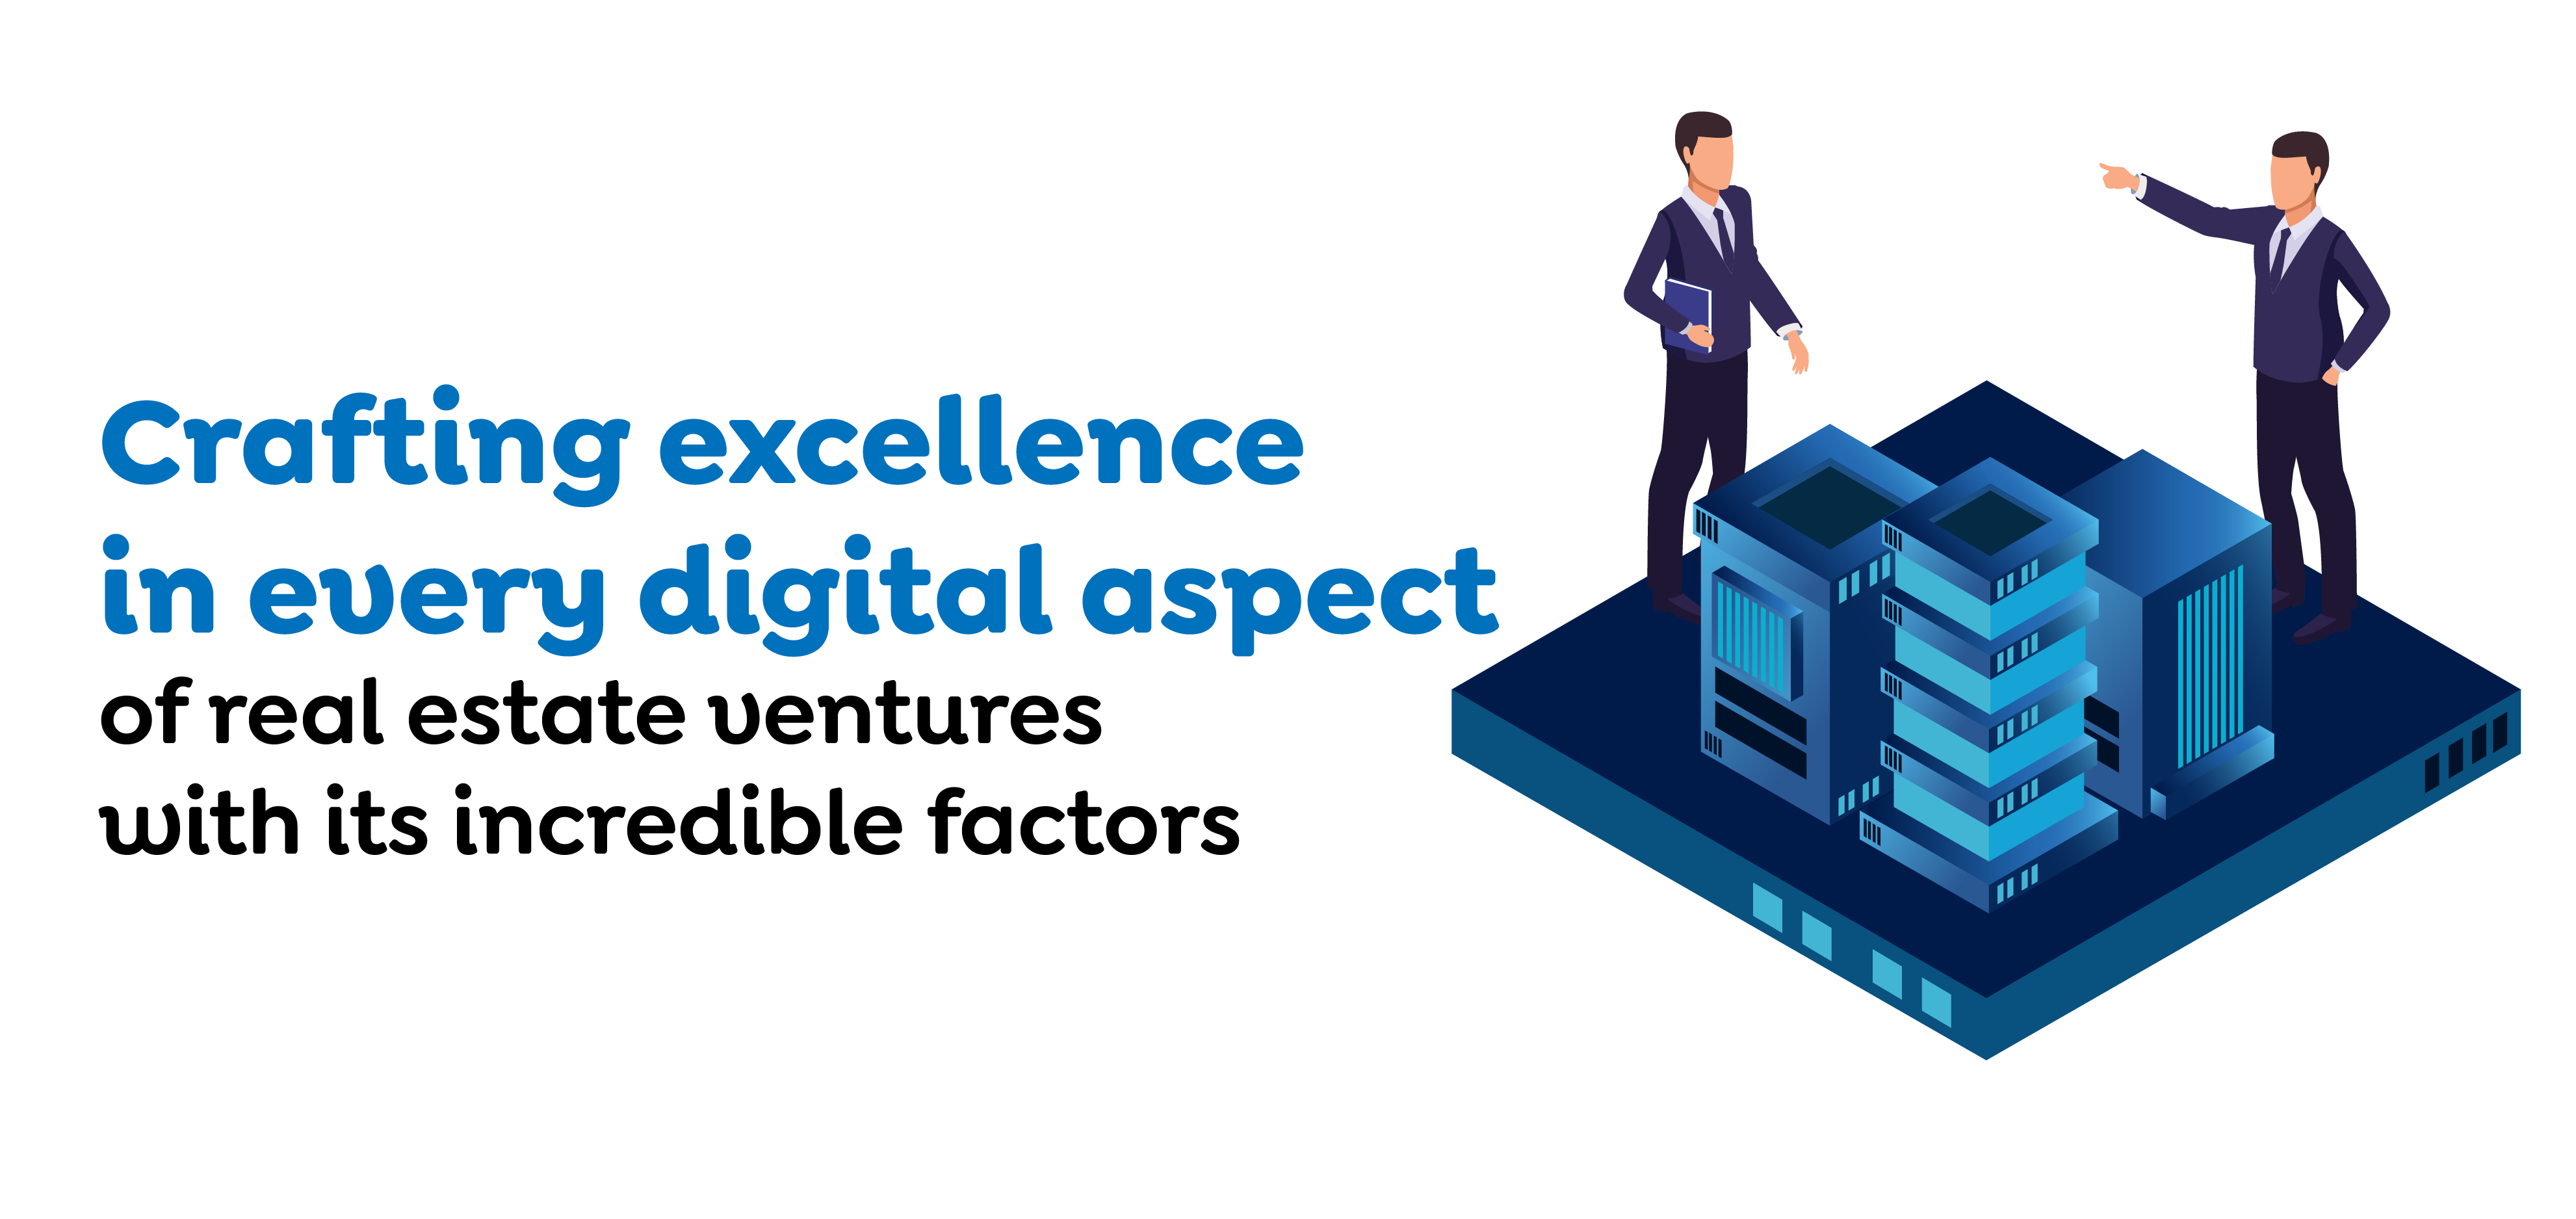 Crafting excellence in every digital aspect of real estate ventures with its incredible factors